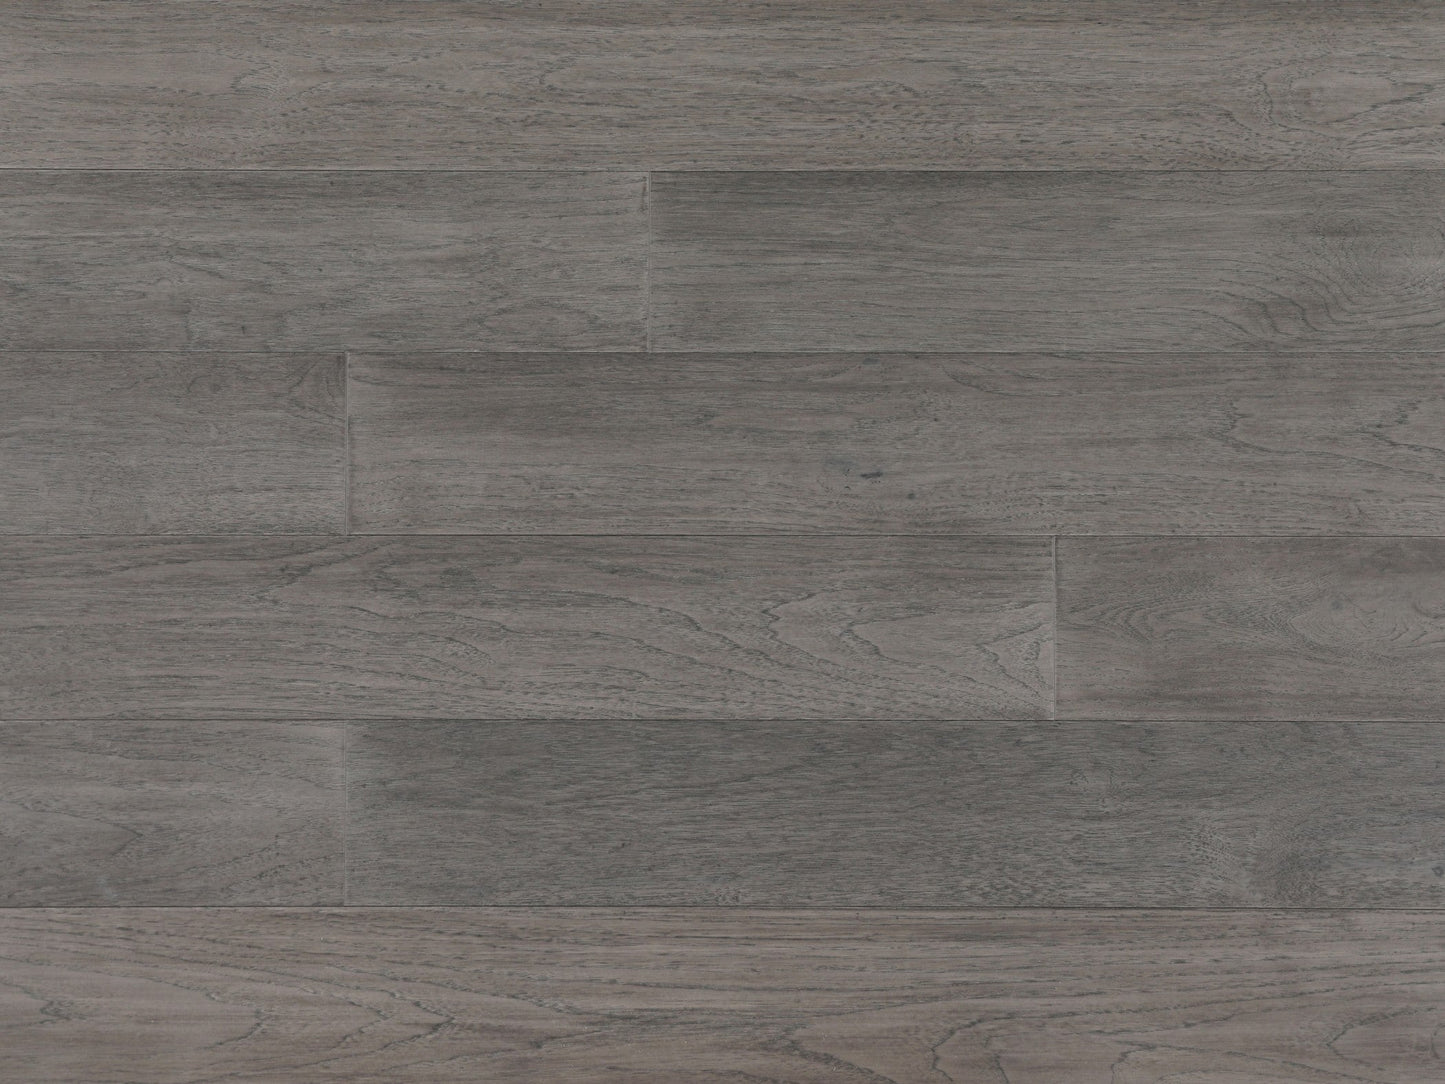 American Hickory San Marino @3.29/sf (Discontinued Promotion)